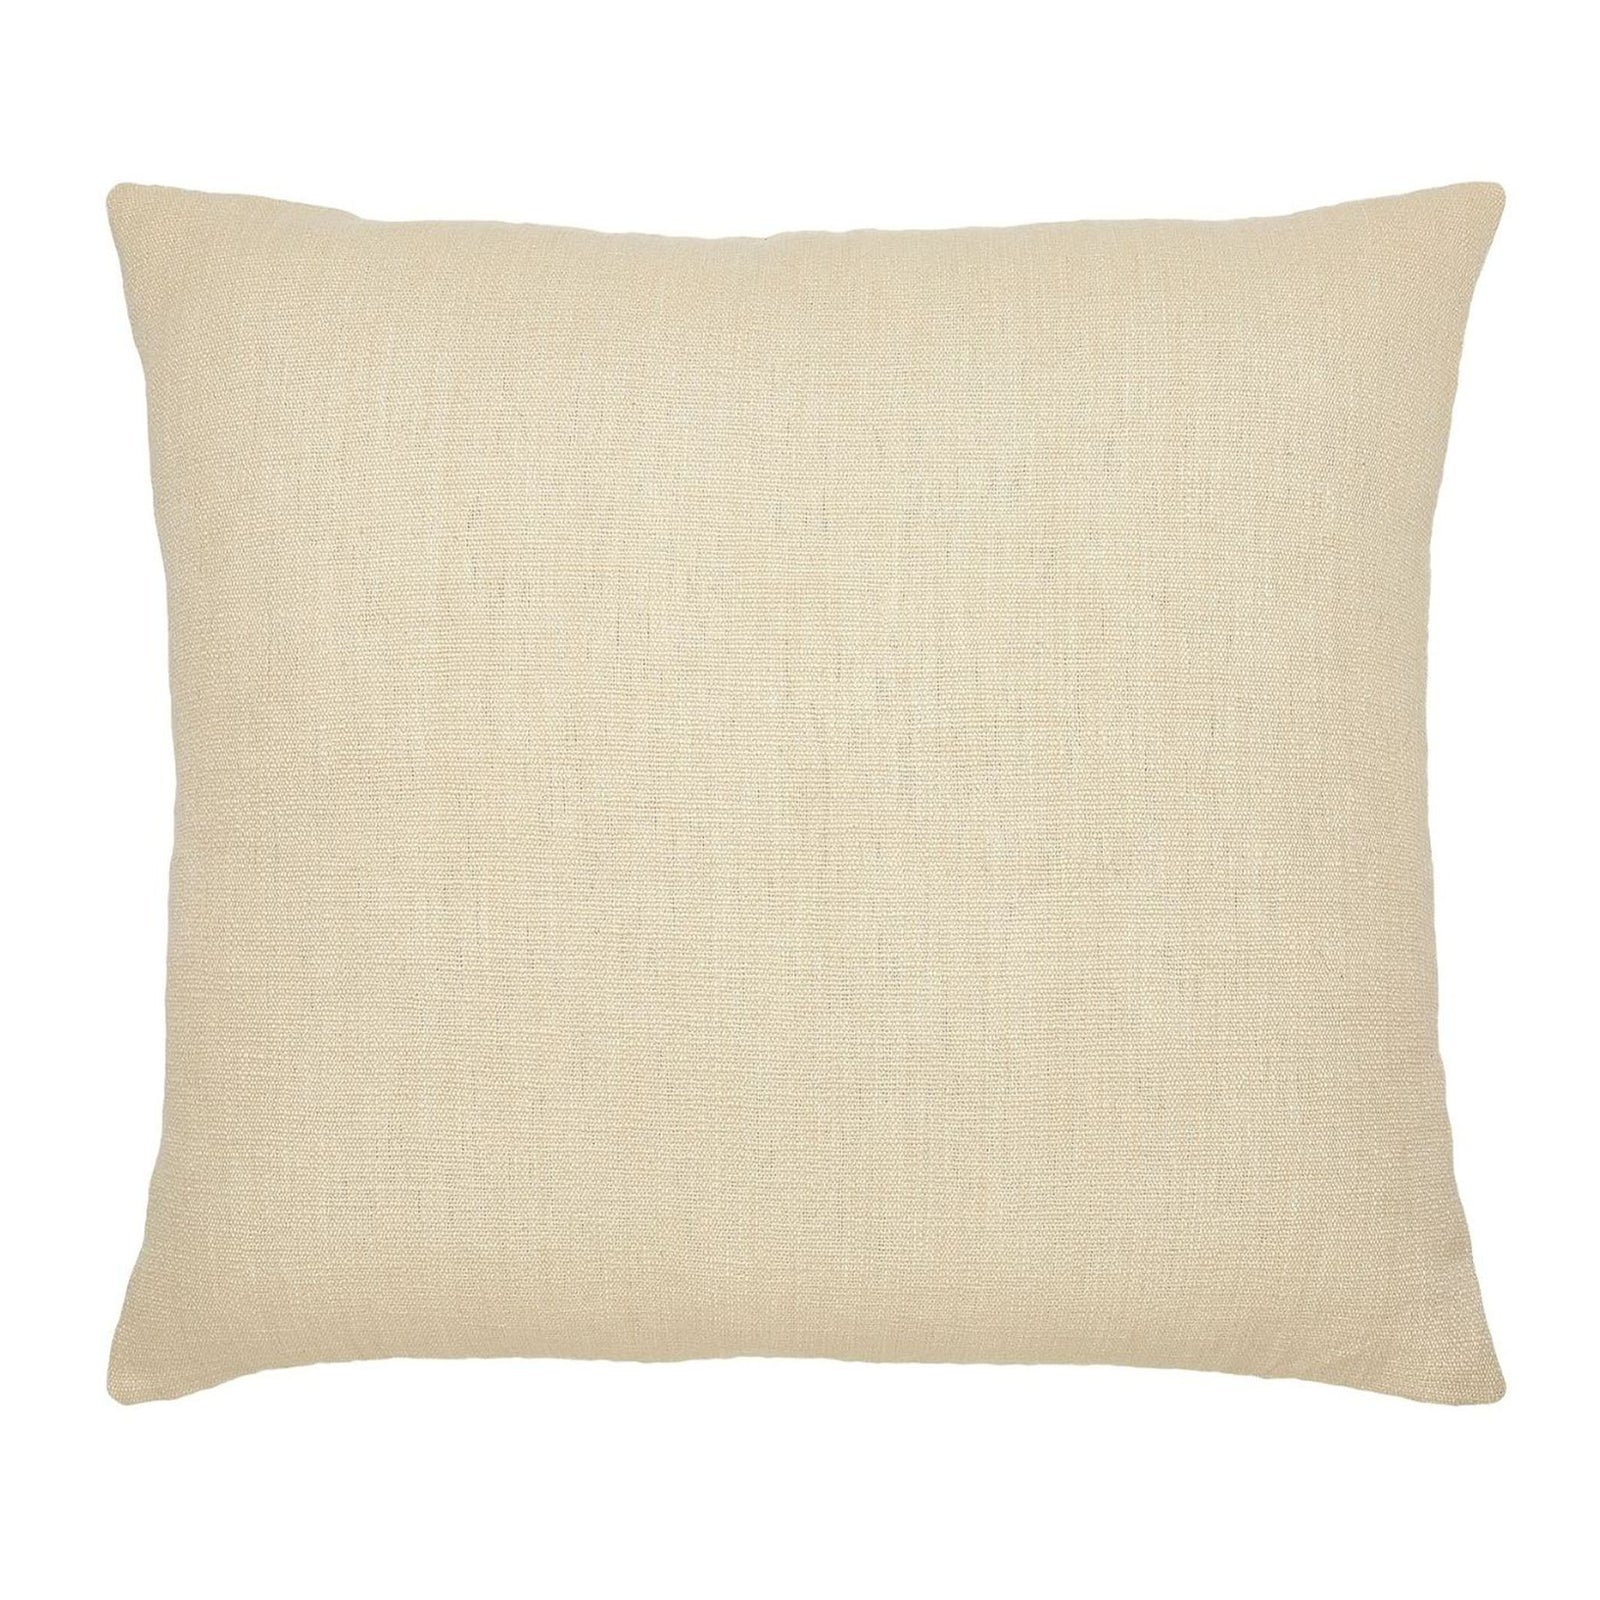 Aamil Sand King Euro Pillow